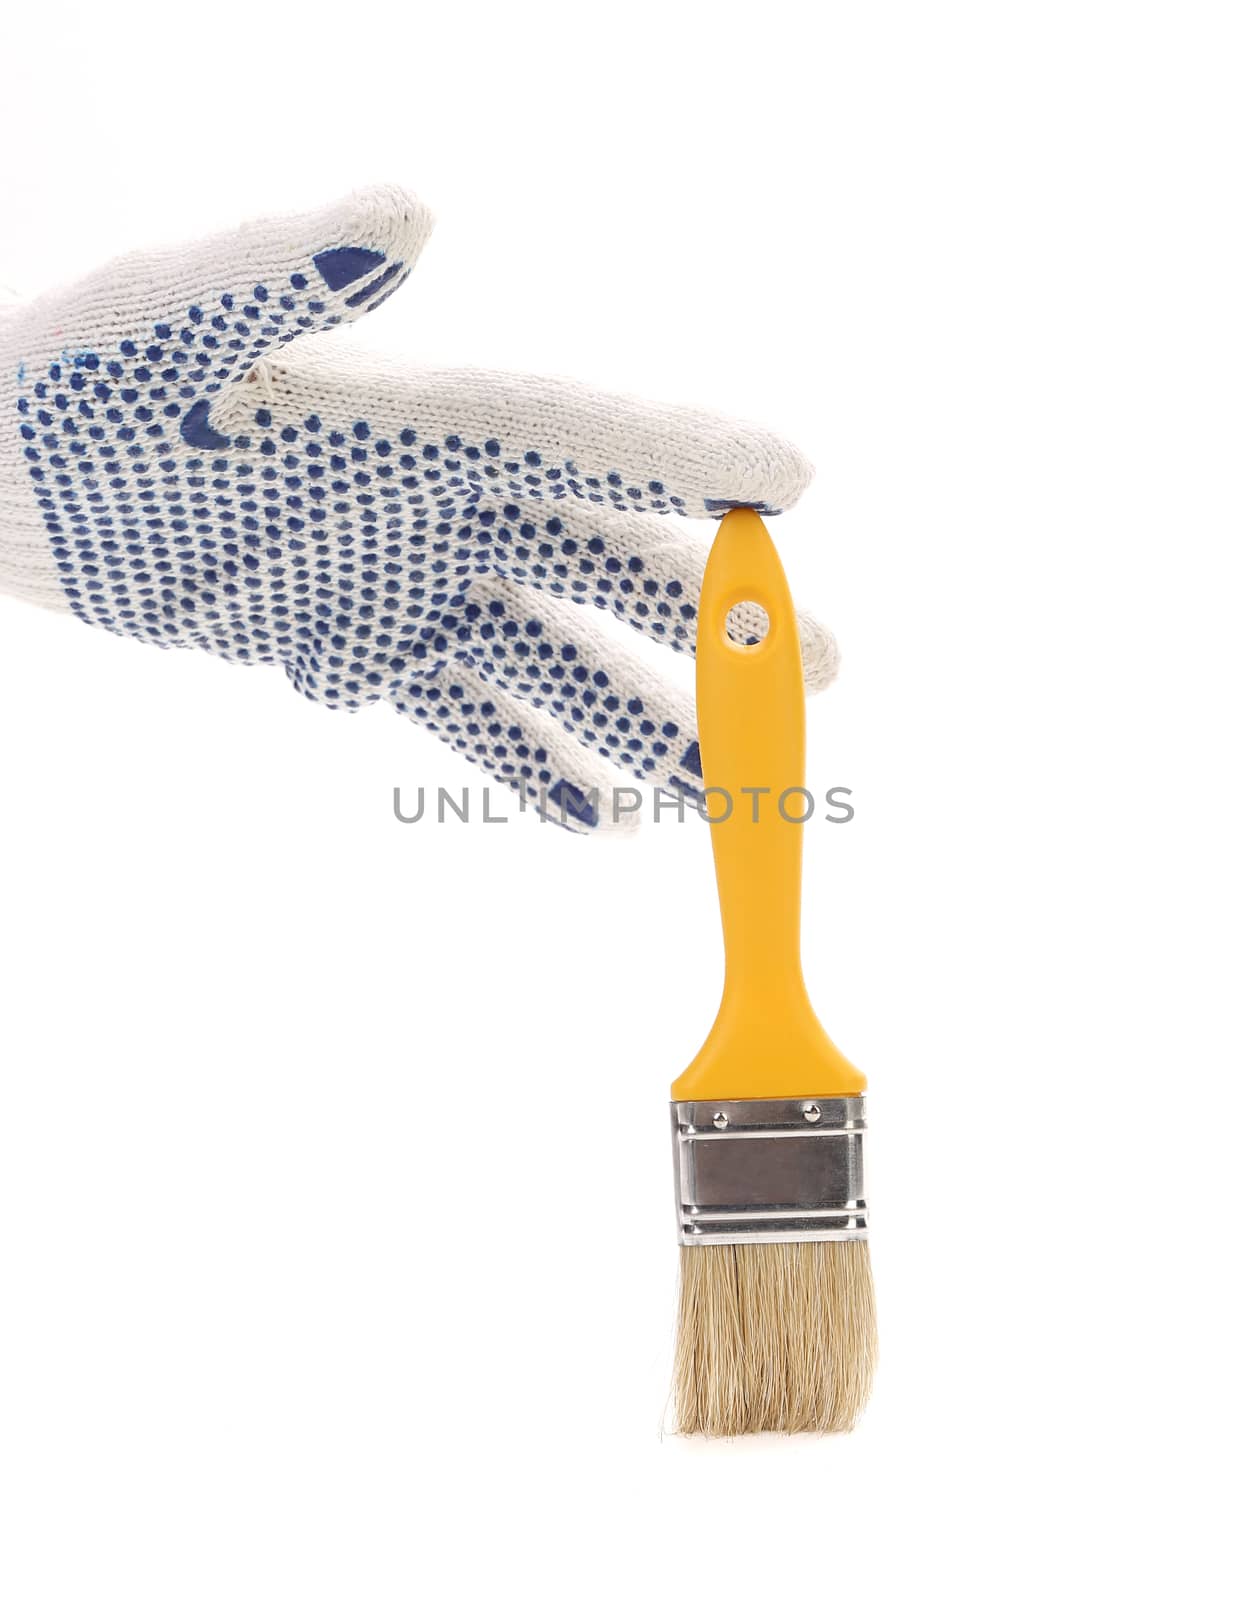 Hand in gloves holds brush. Isolated on a white background.